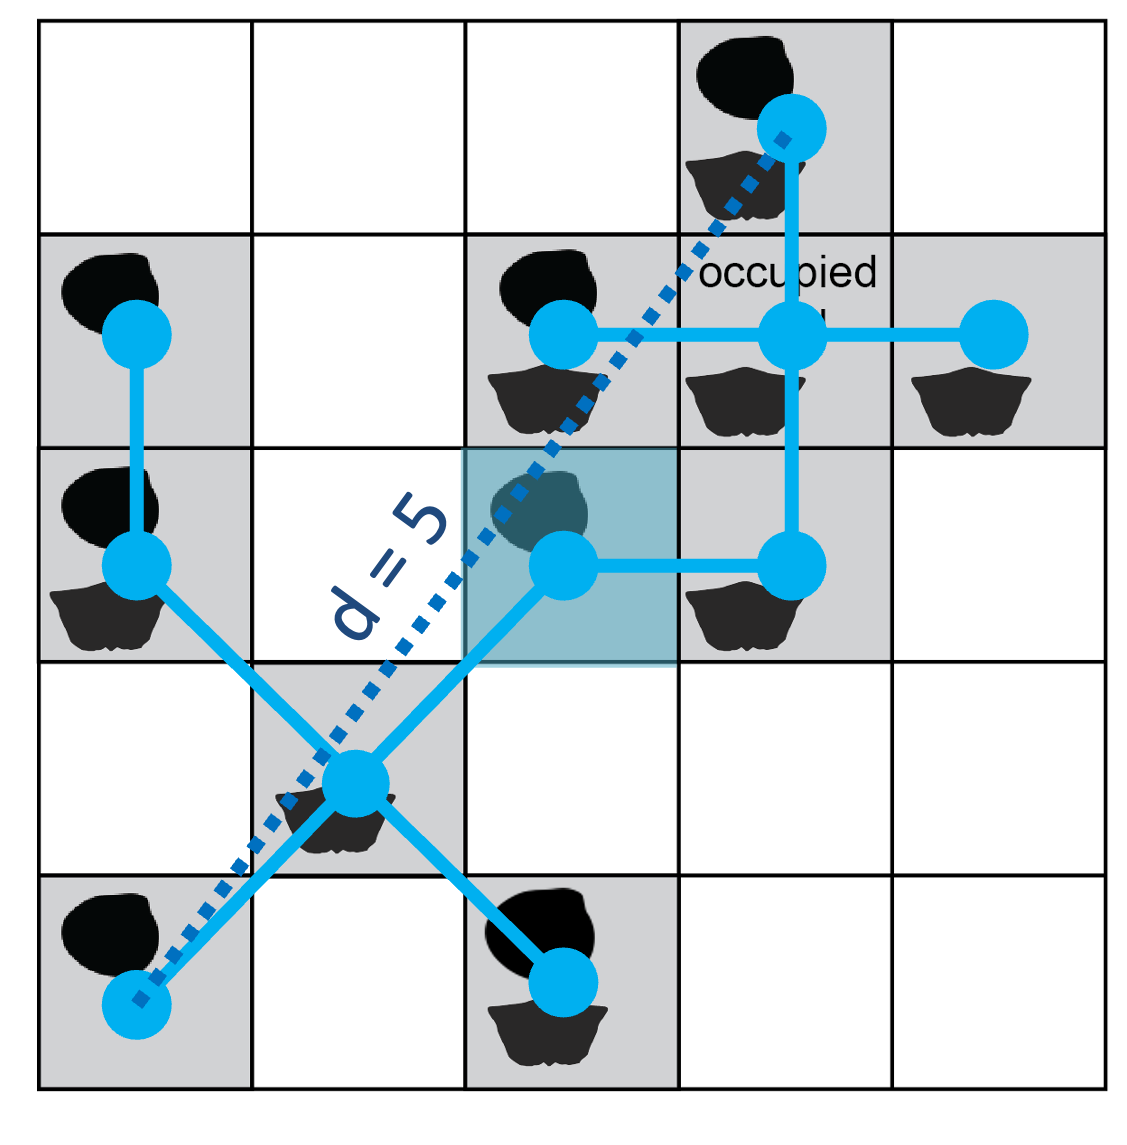 A network of lines is drawn over the grid, with the endpoints of each line connecting two nearby, occupied grid cells. All occupied cells are touched by line ends.